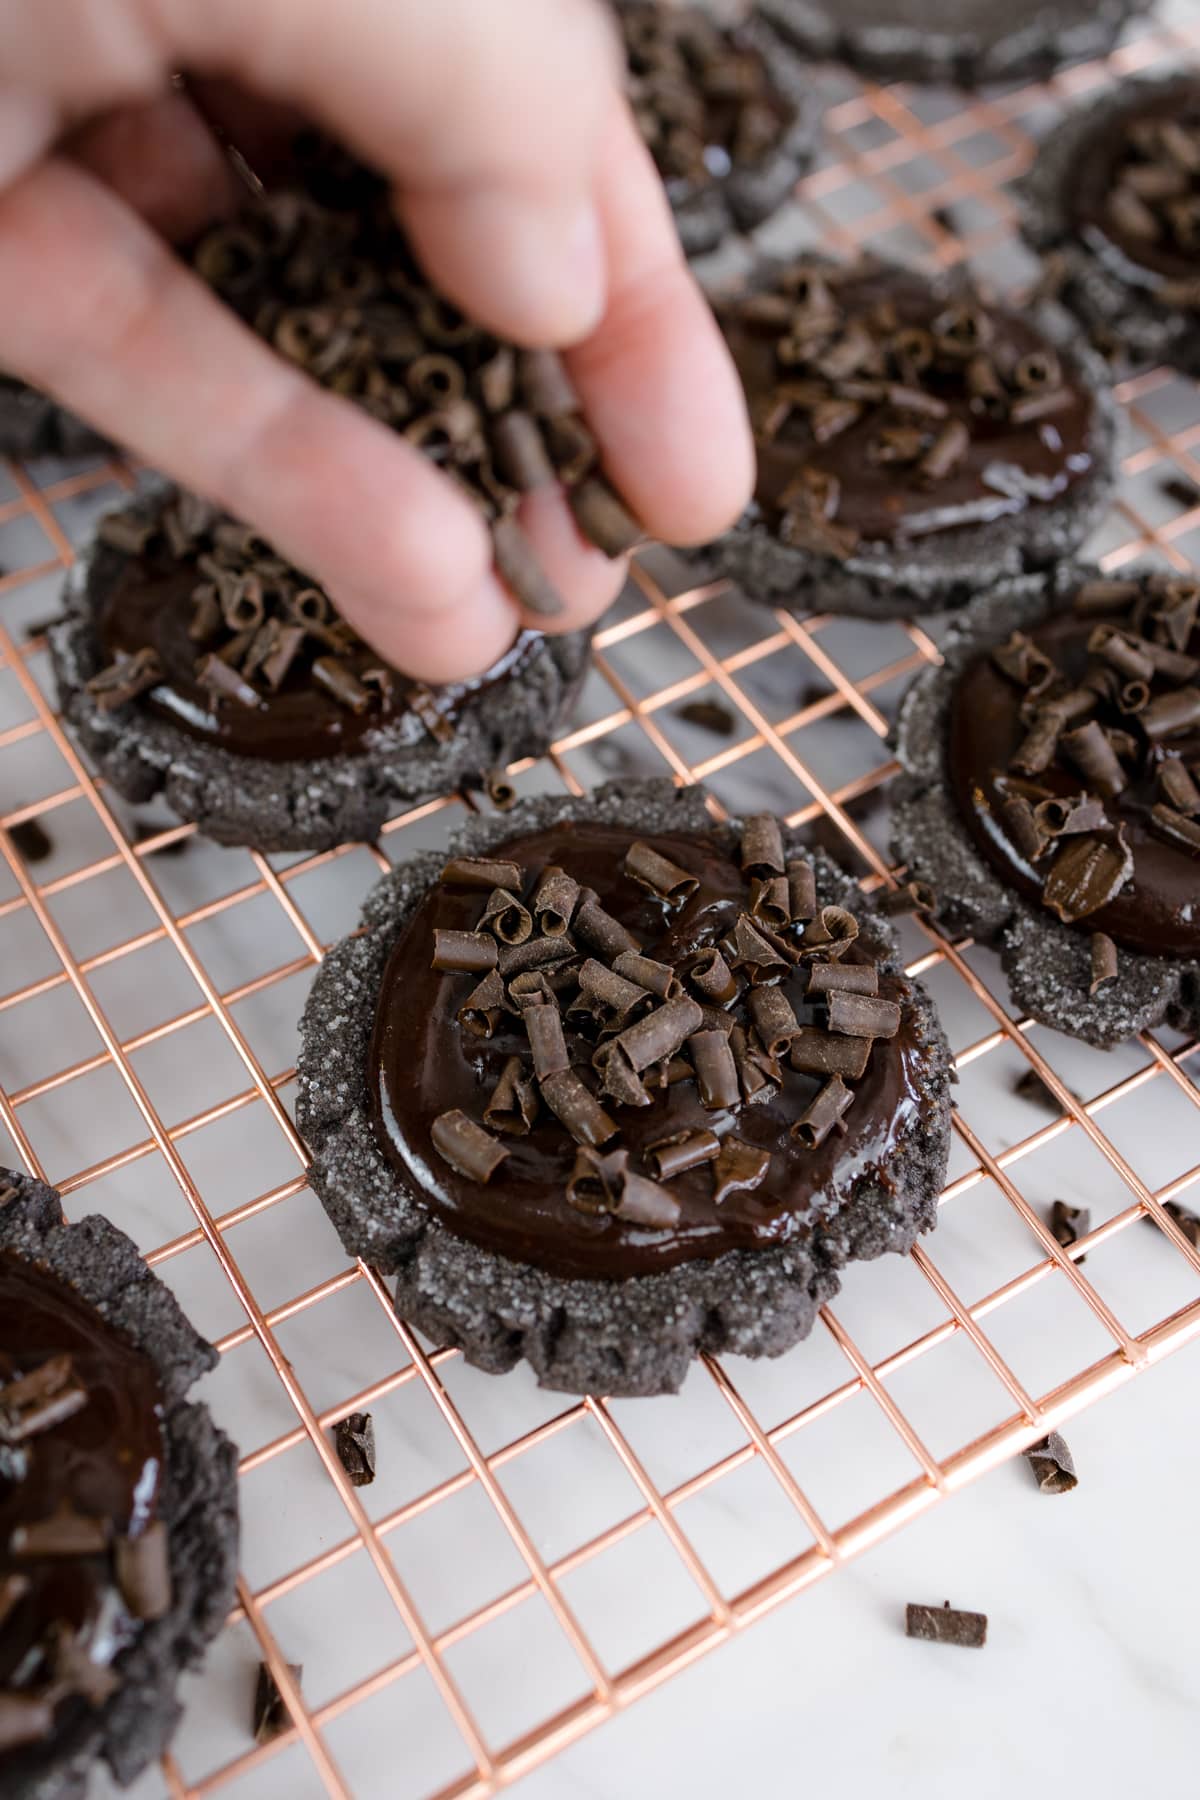 Close up of chocolate curls being sprinkled on top of chocolate ganache on a chocolate sugar cookie.